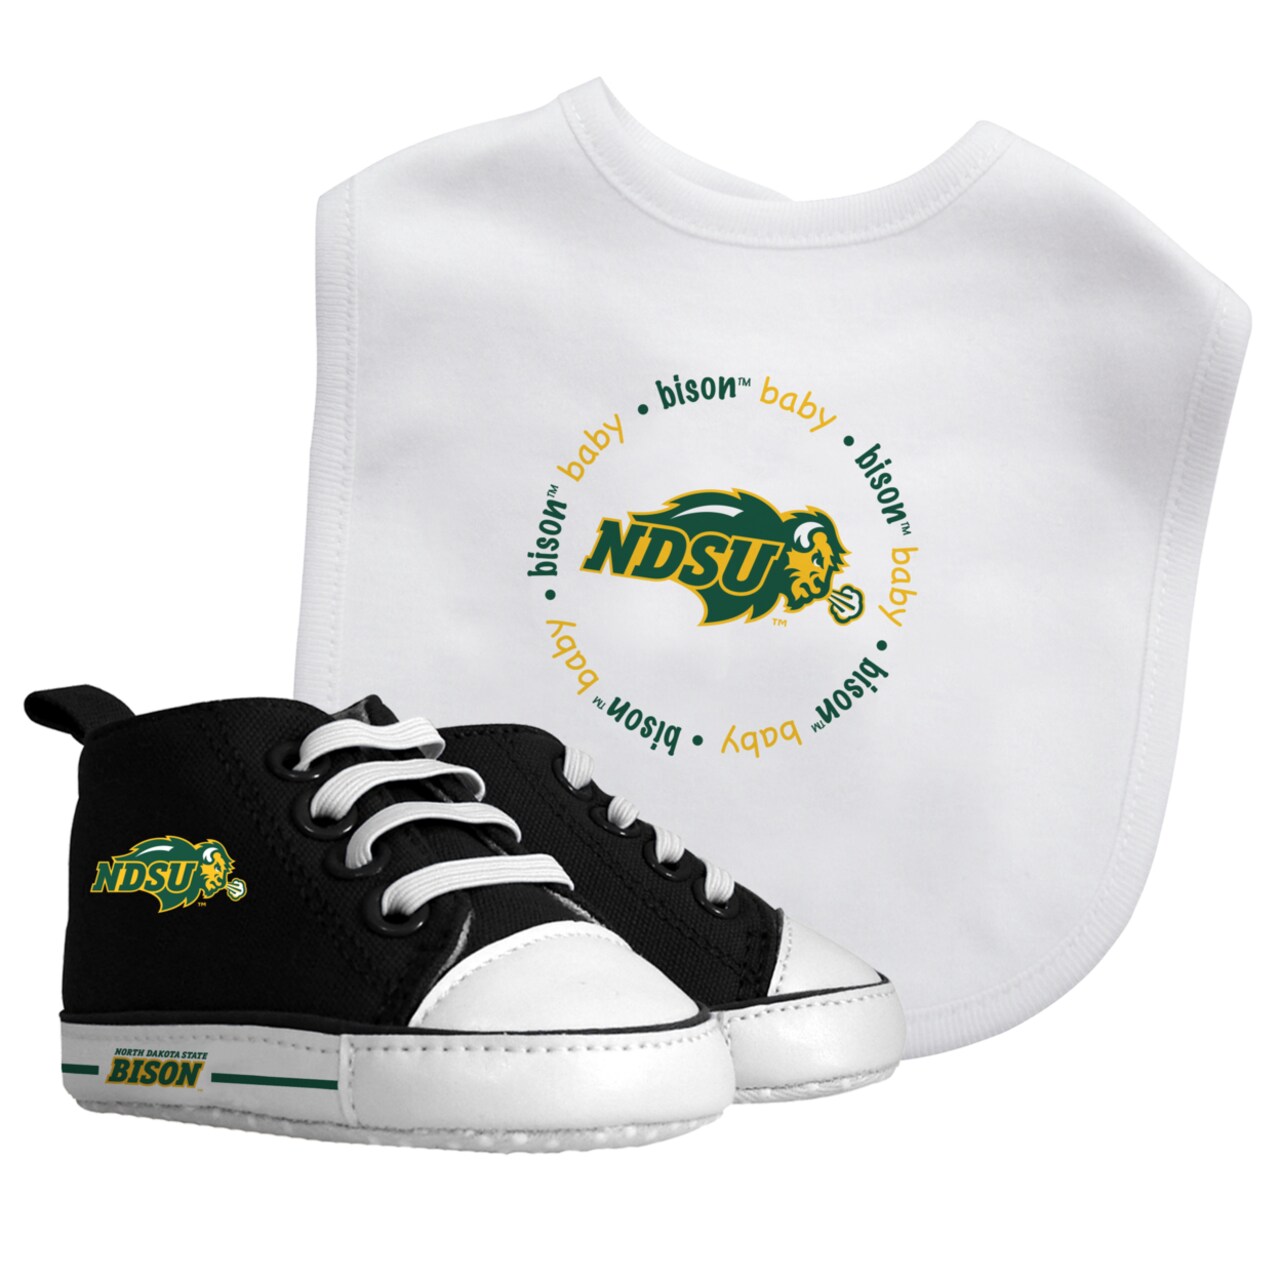 Baby Fanatic   2 Piece Bid and Shoes - NCAA North Dakota State Bison - White Unisex Infant Apparel